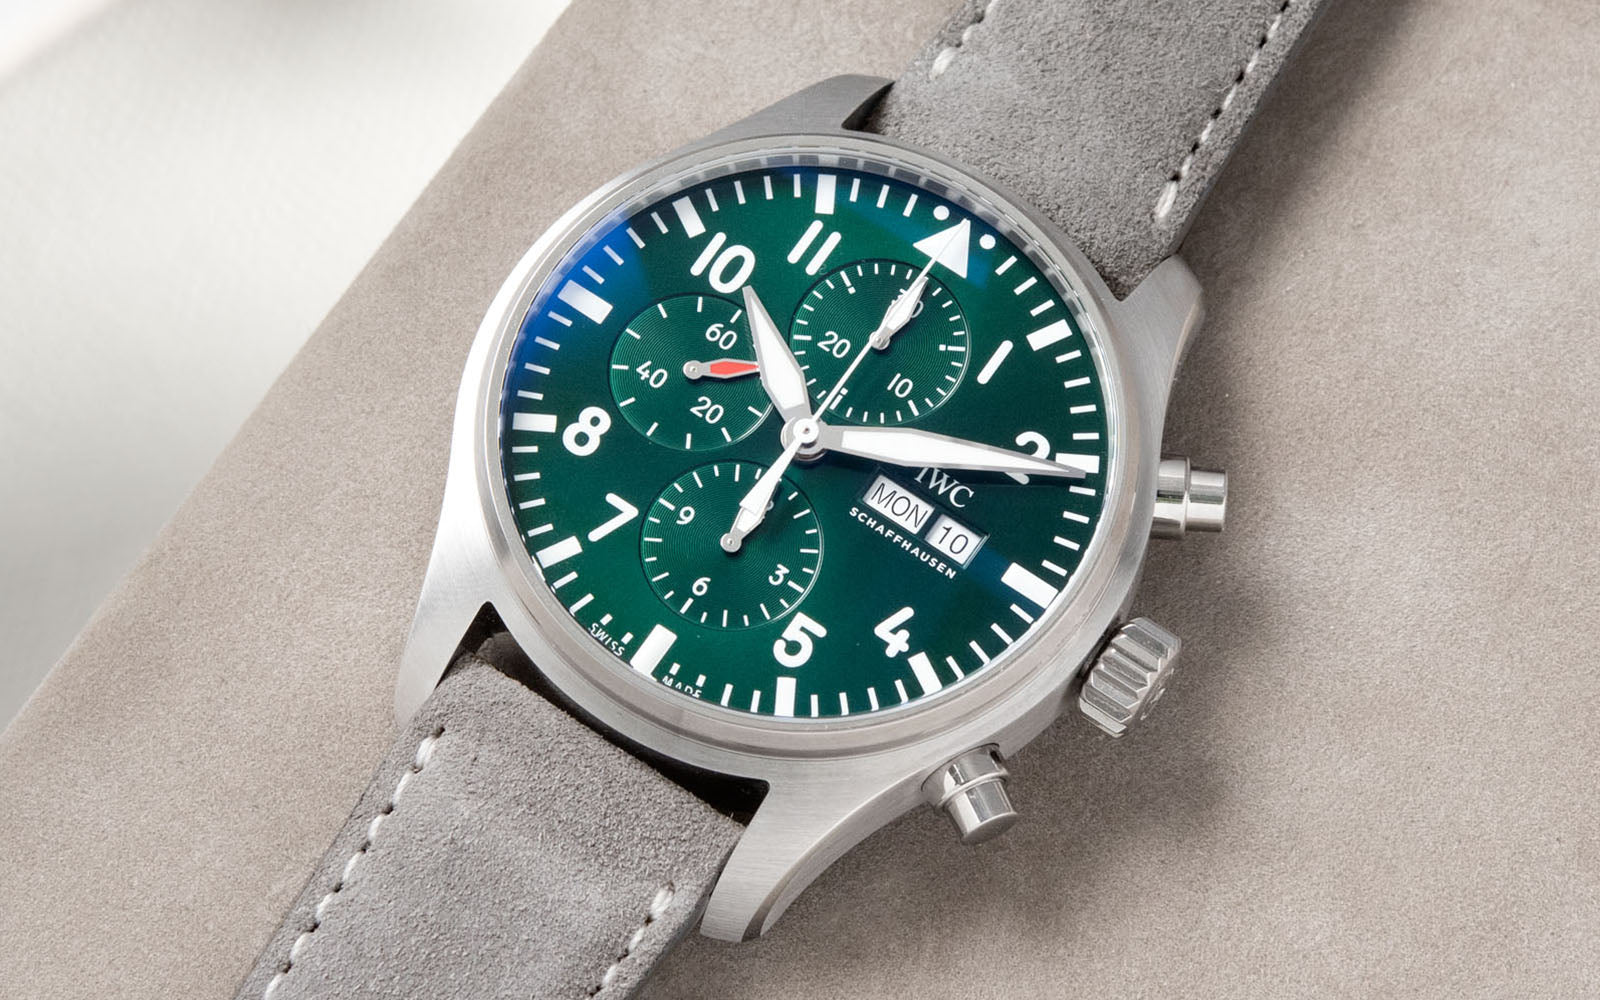 Strap Guide – The IWC Spitfire Pilot’s Chronograph Watch